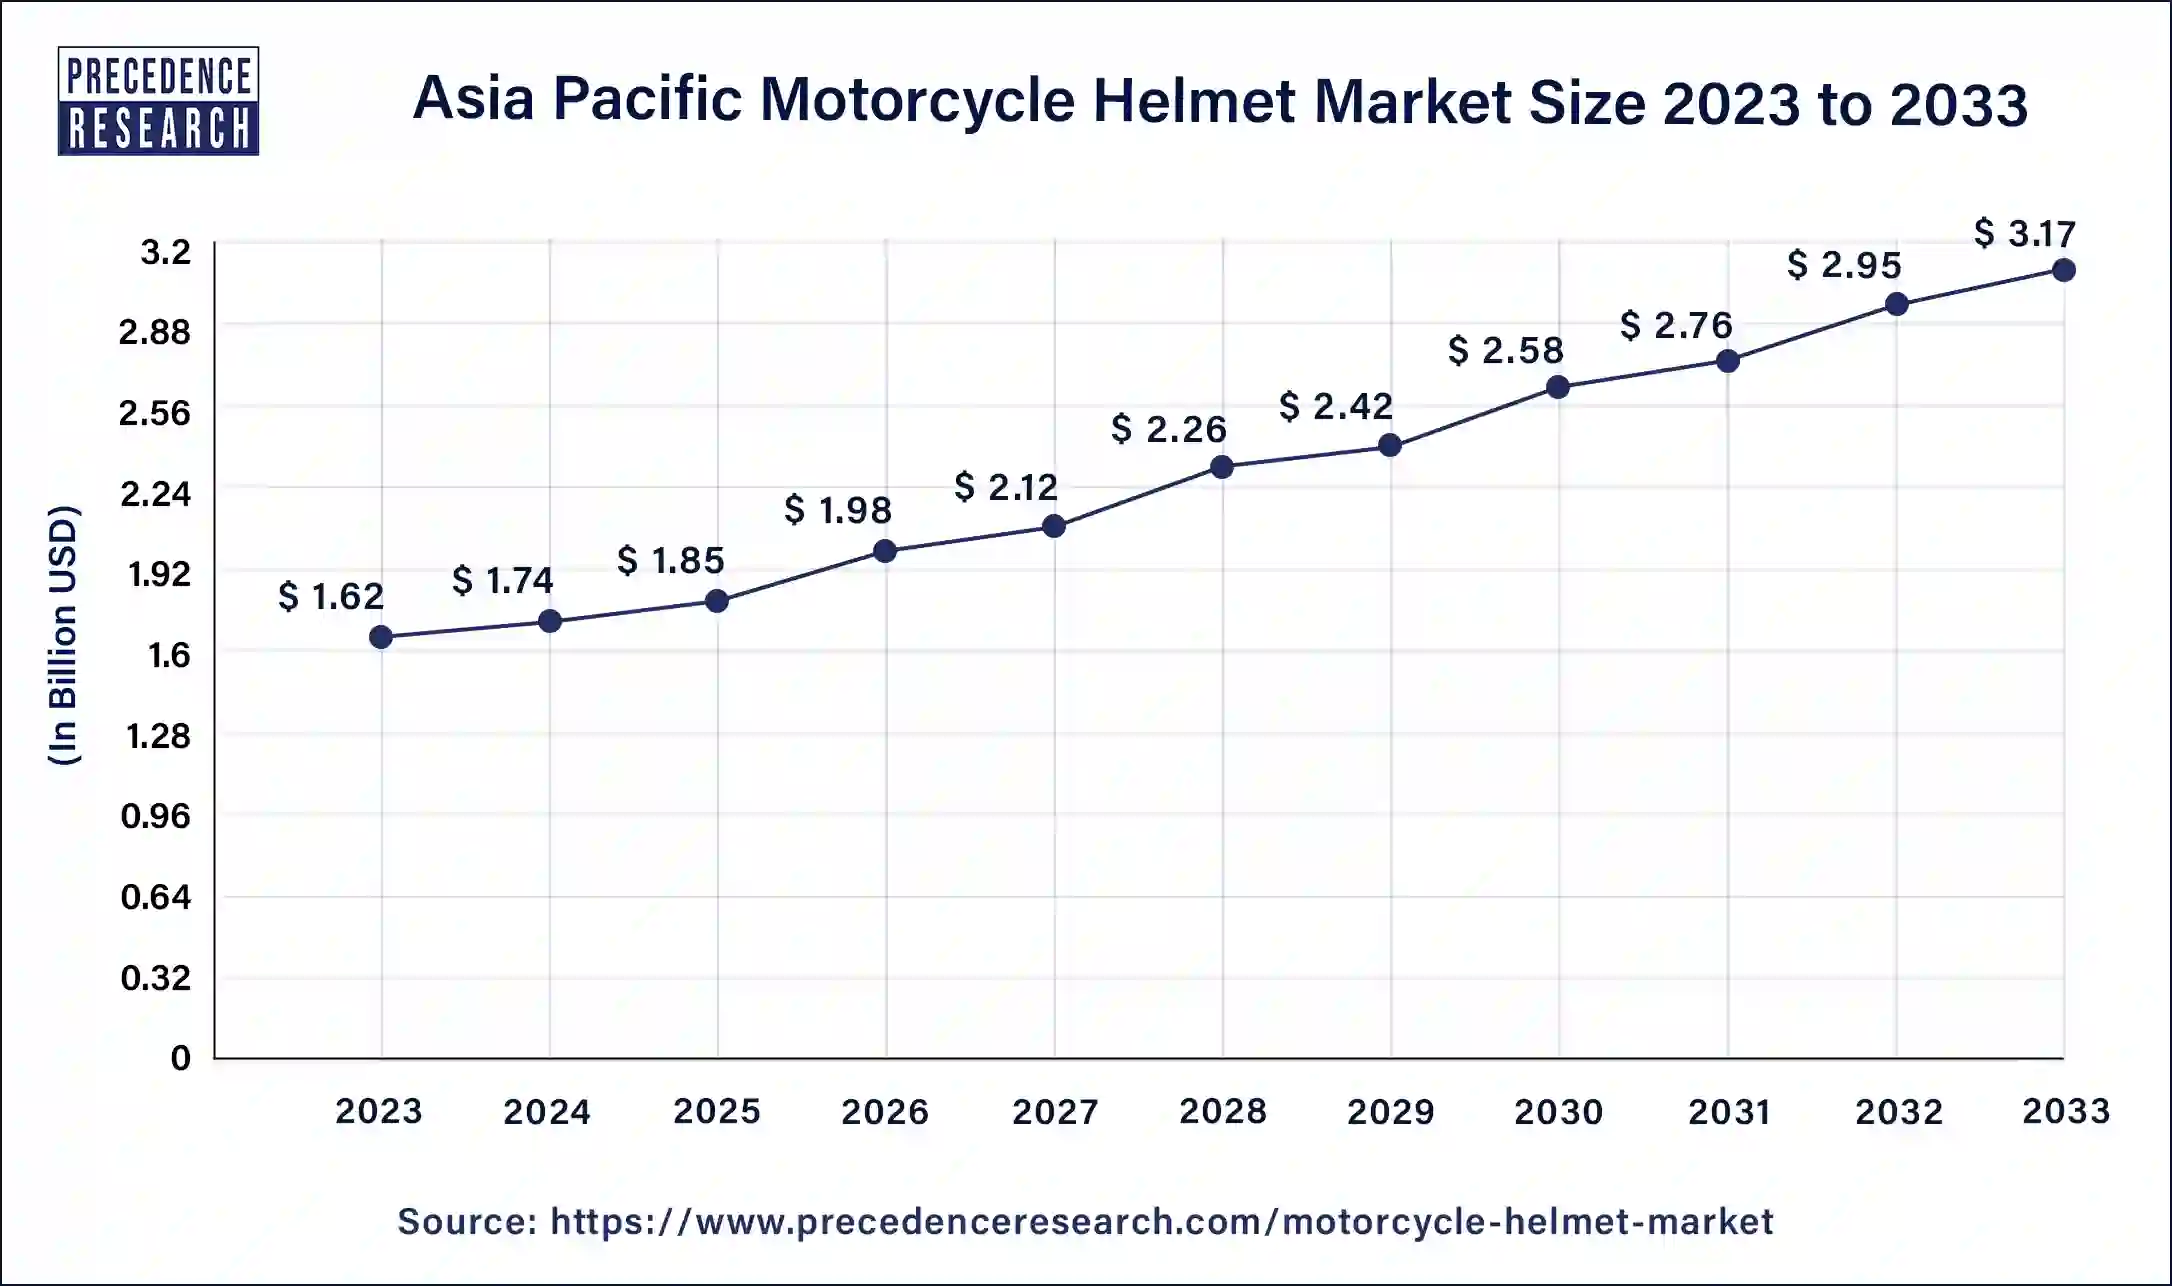 Asia Pacific Motorcycle Helmet Market Size 2024 to 2033